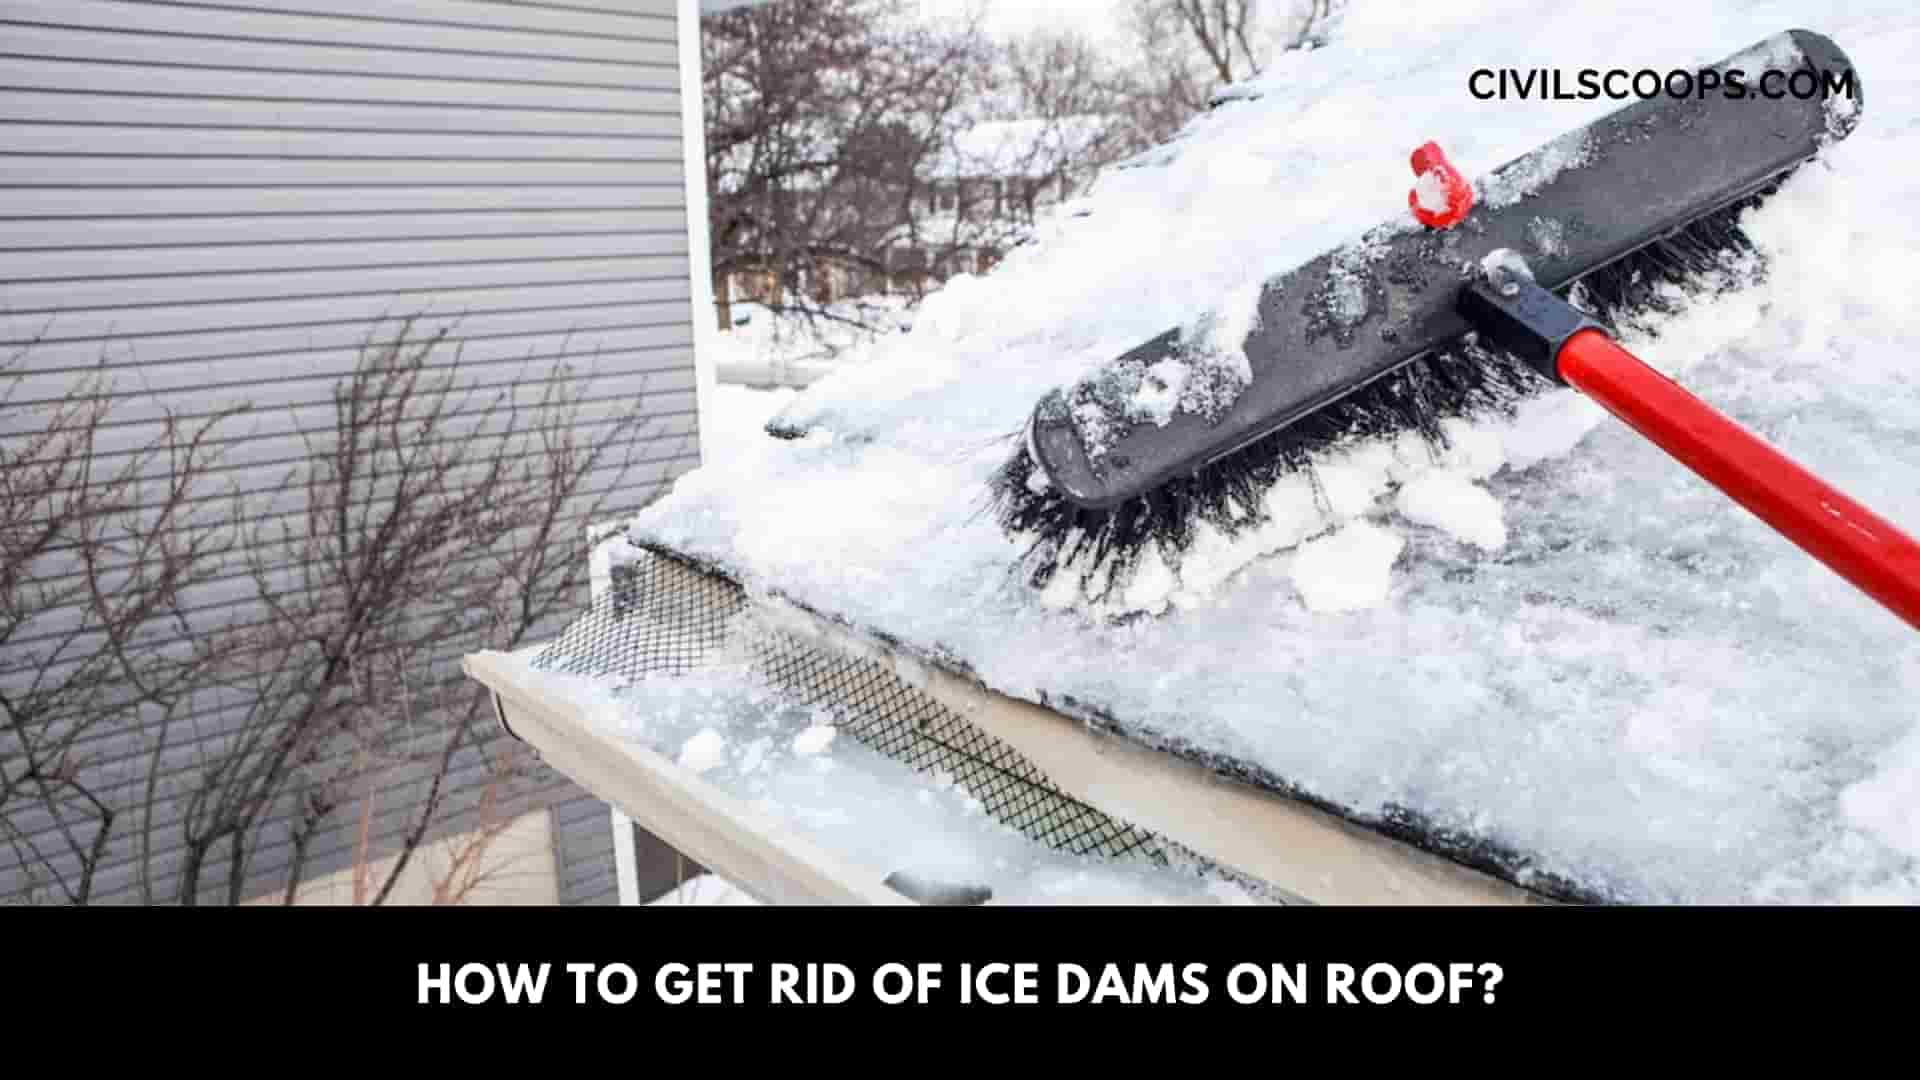 How to Get Rid of Ice Dams on Roof?